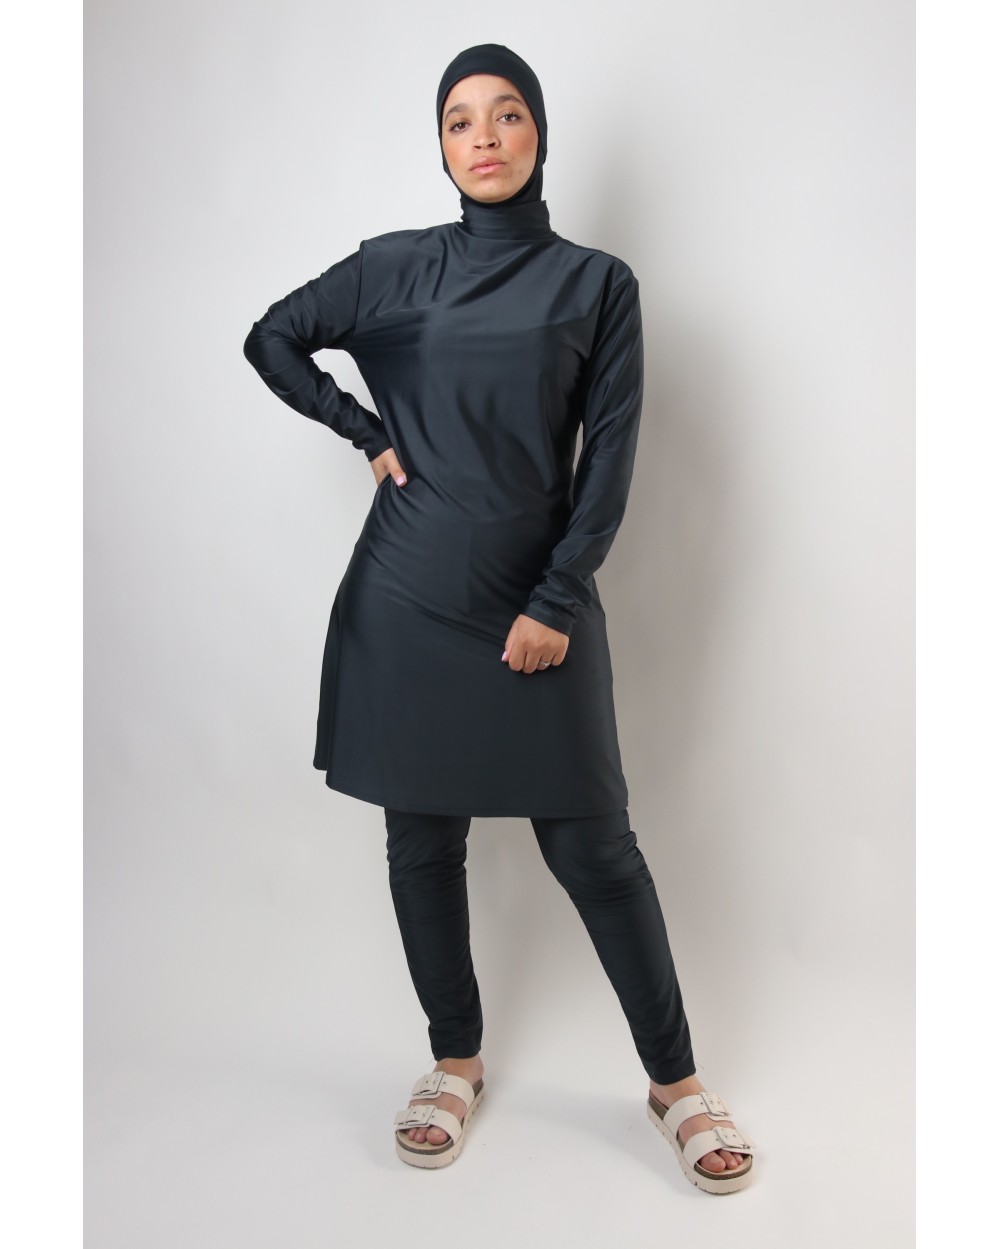 Burkini allowed in swimming pools in france ? Modest Color Navy Size XXL Color Navy Size XXL